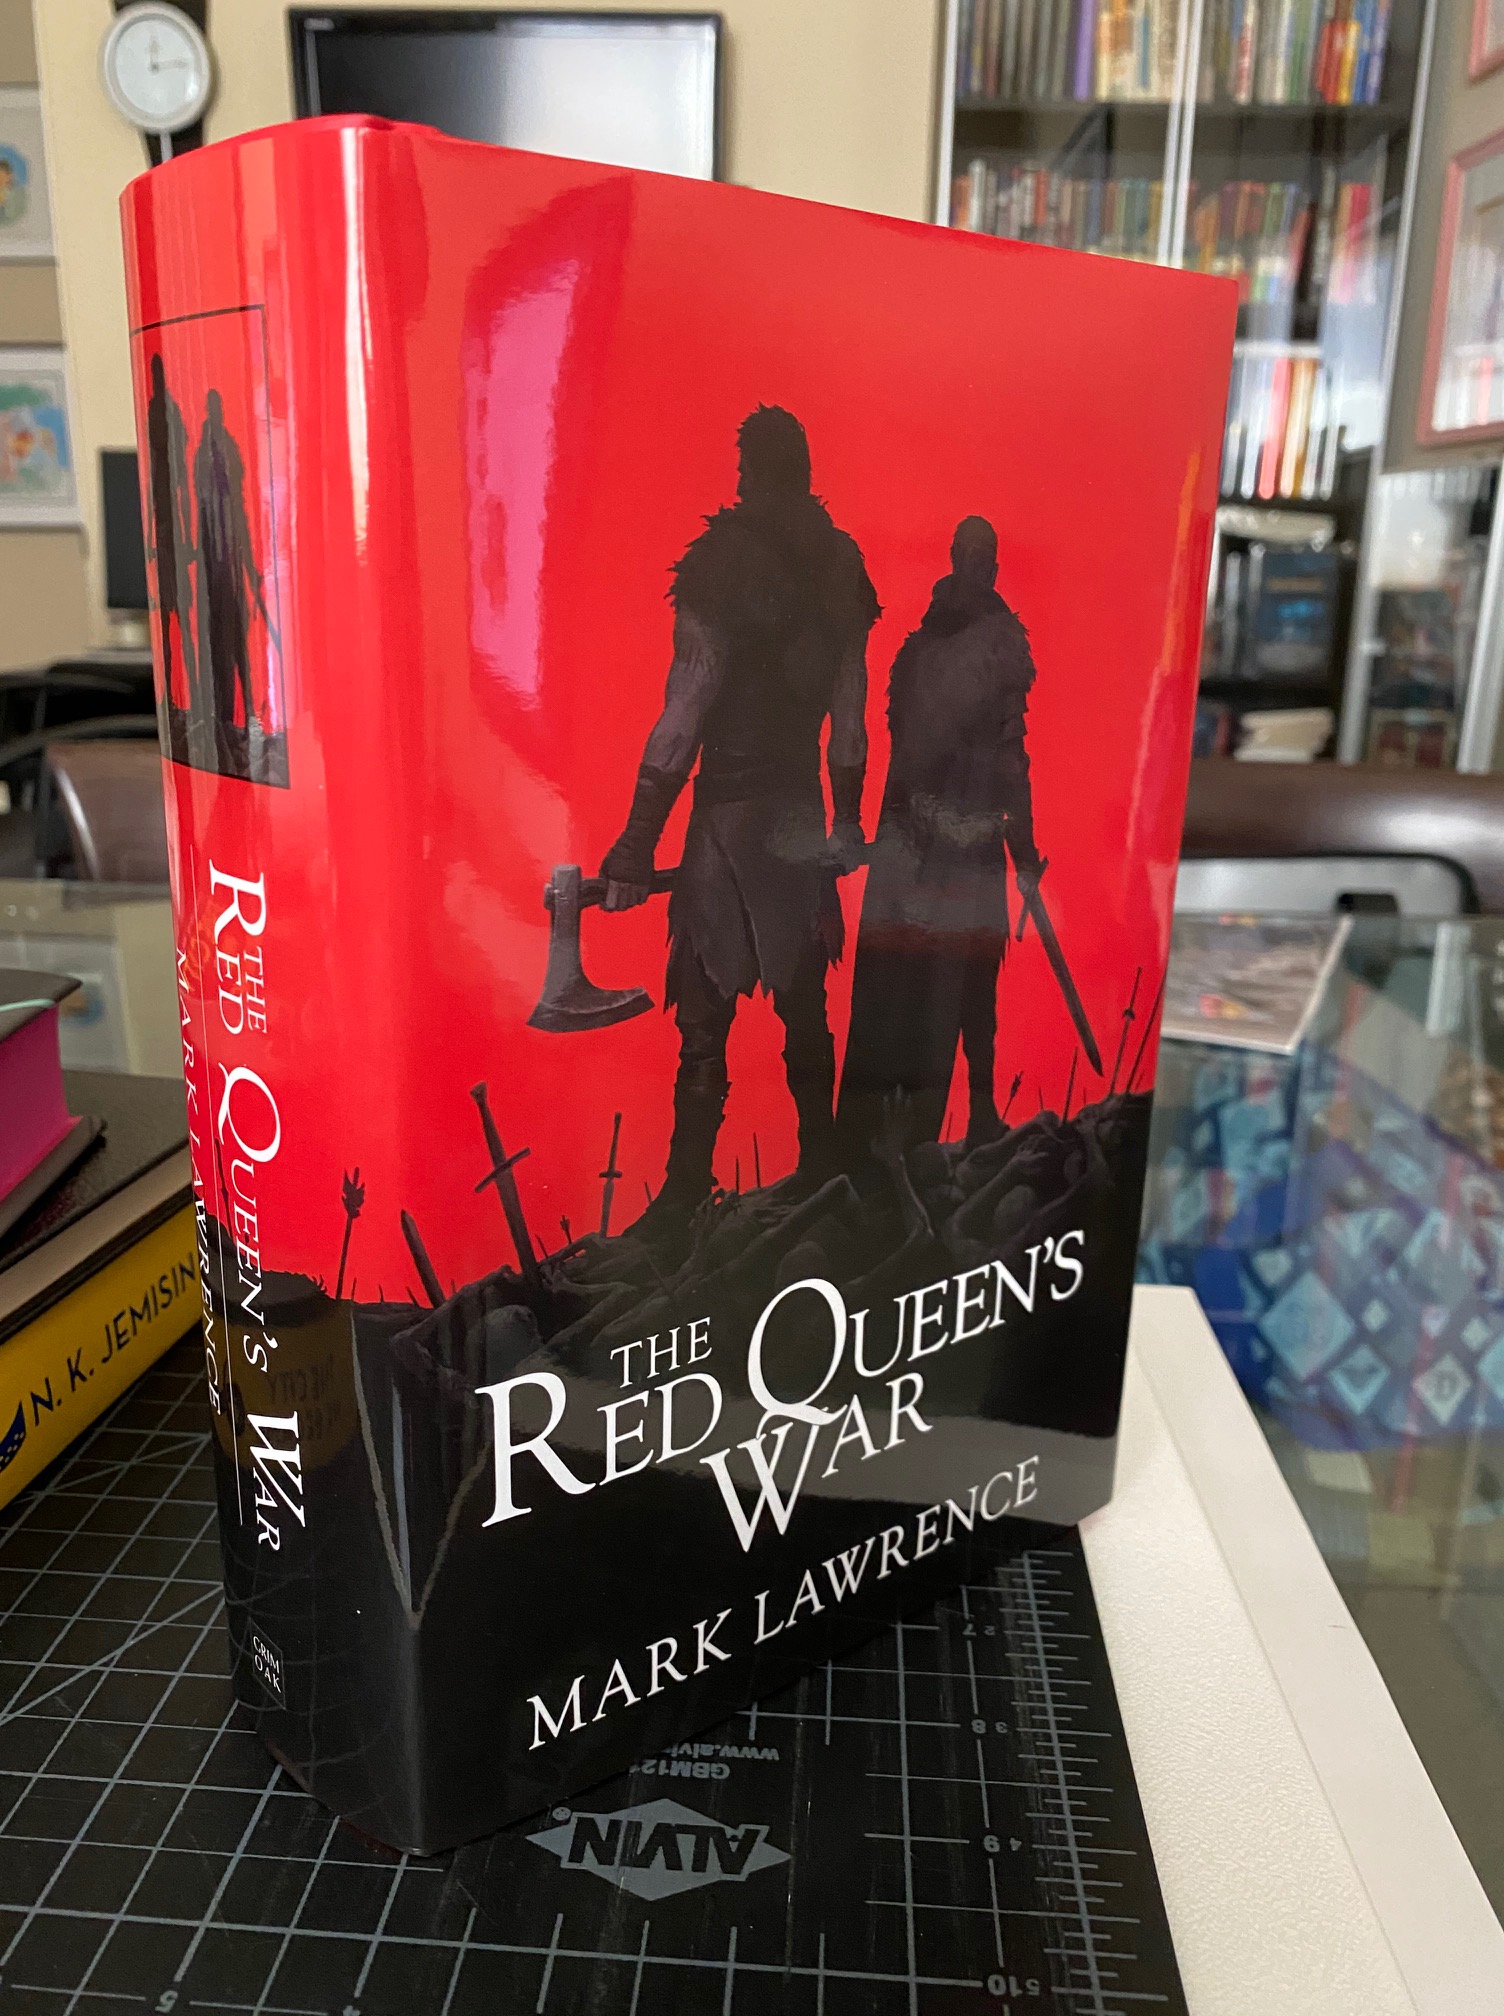 Mark Lawrence Twitter: "If you've read "The New World" in The Red Queen's don't forget to rate/review Goodreads! https://t.co/7MIrX36twb https://t.co/LTUdwxqWO1" / Twitter